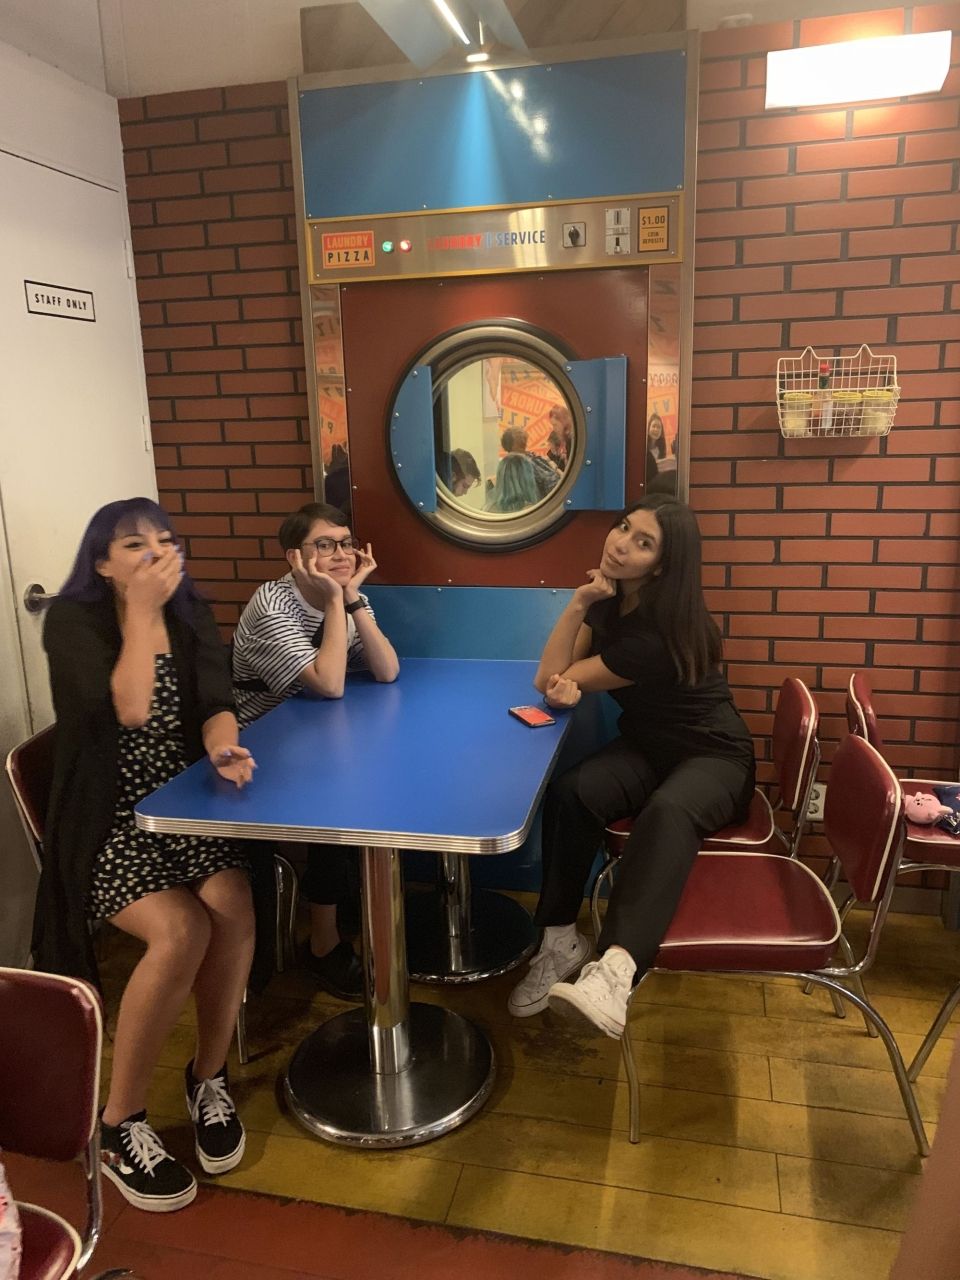 Three students posing by the interior of Laundry Pizza restaurant.